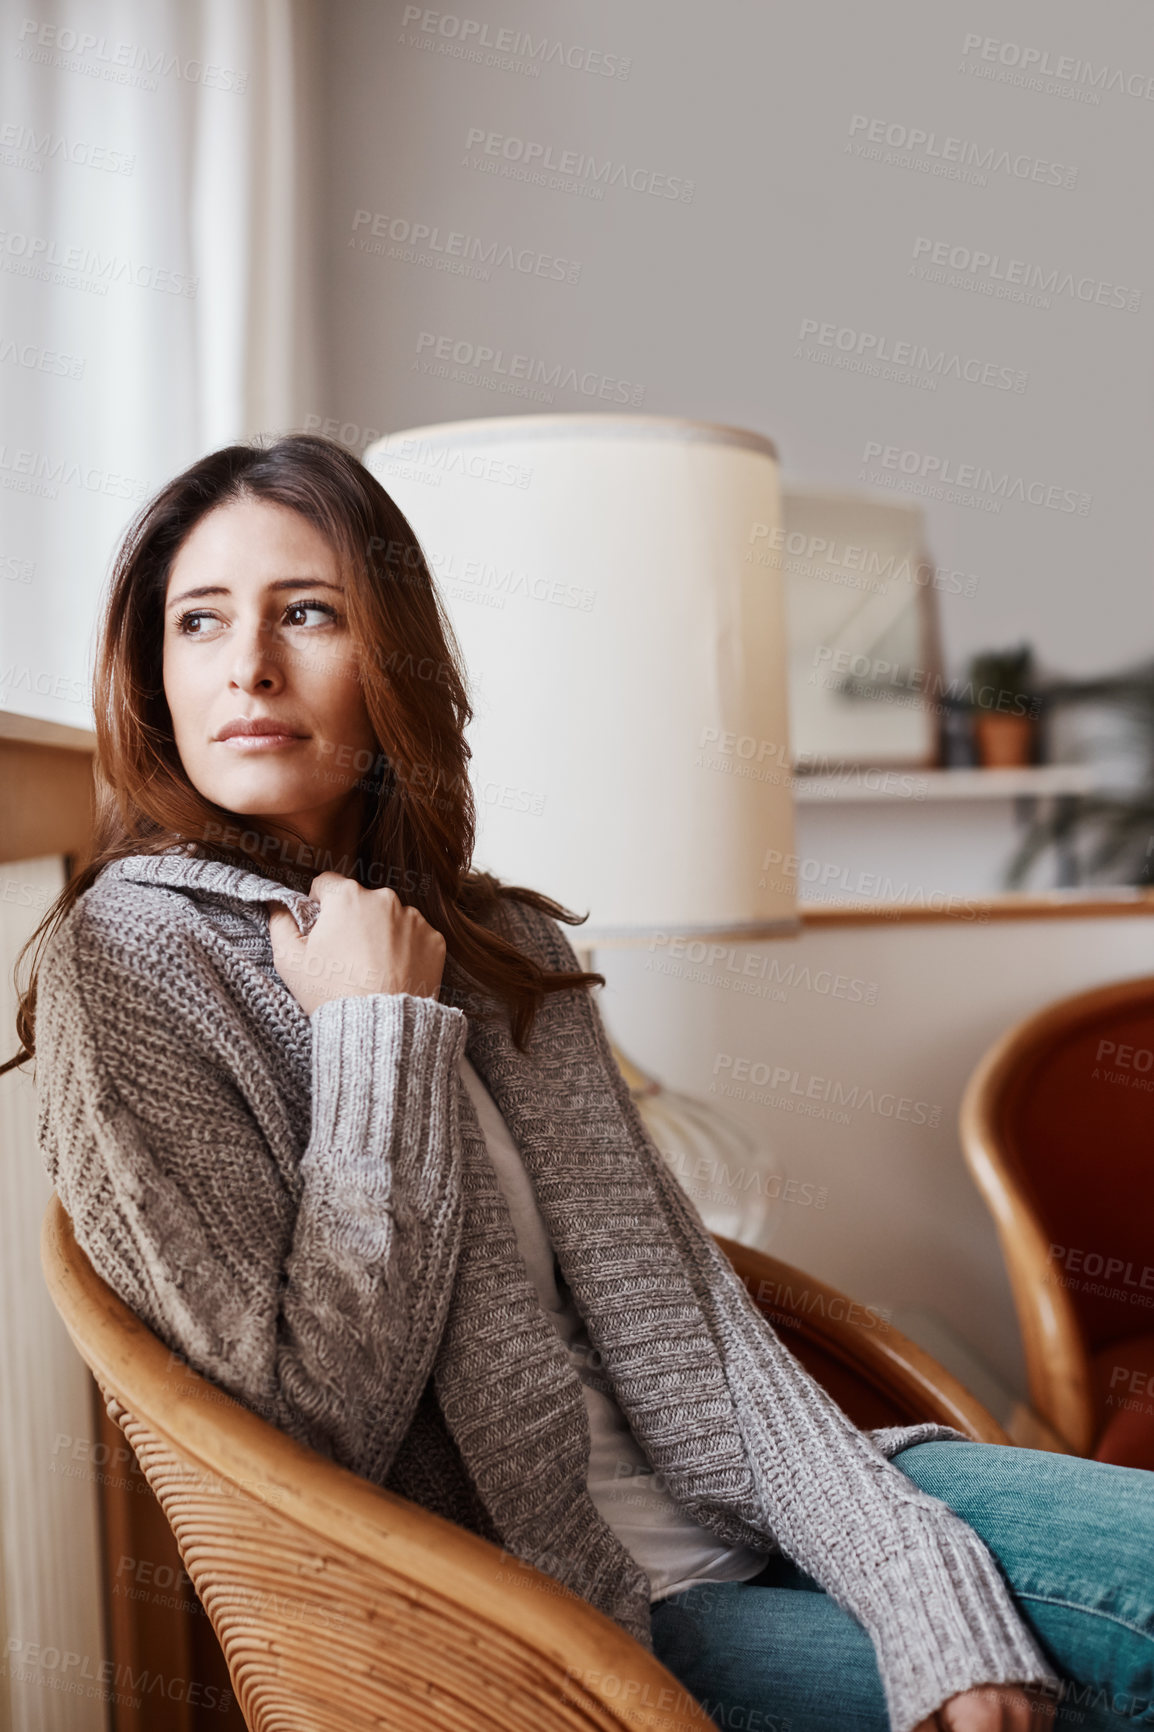 Buy stock photo Shot of an attractive young woman relaxing on a chair at home